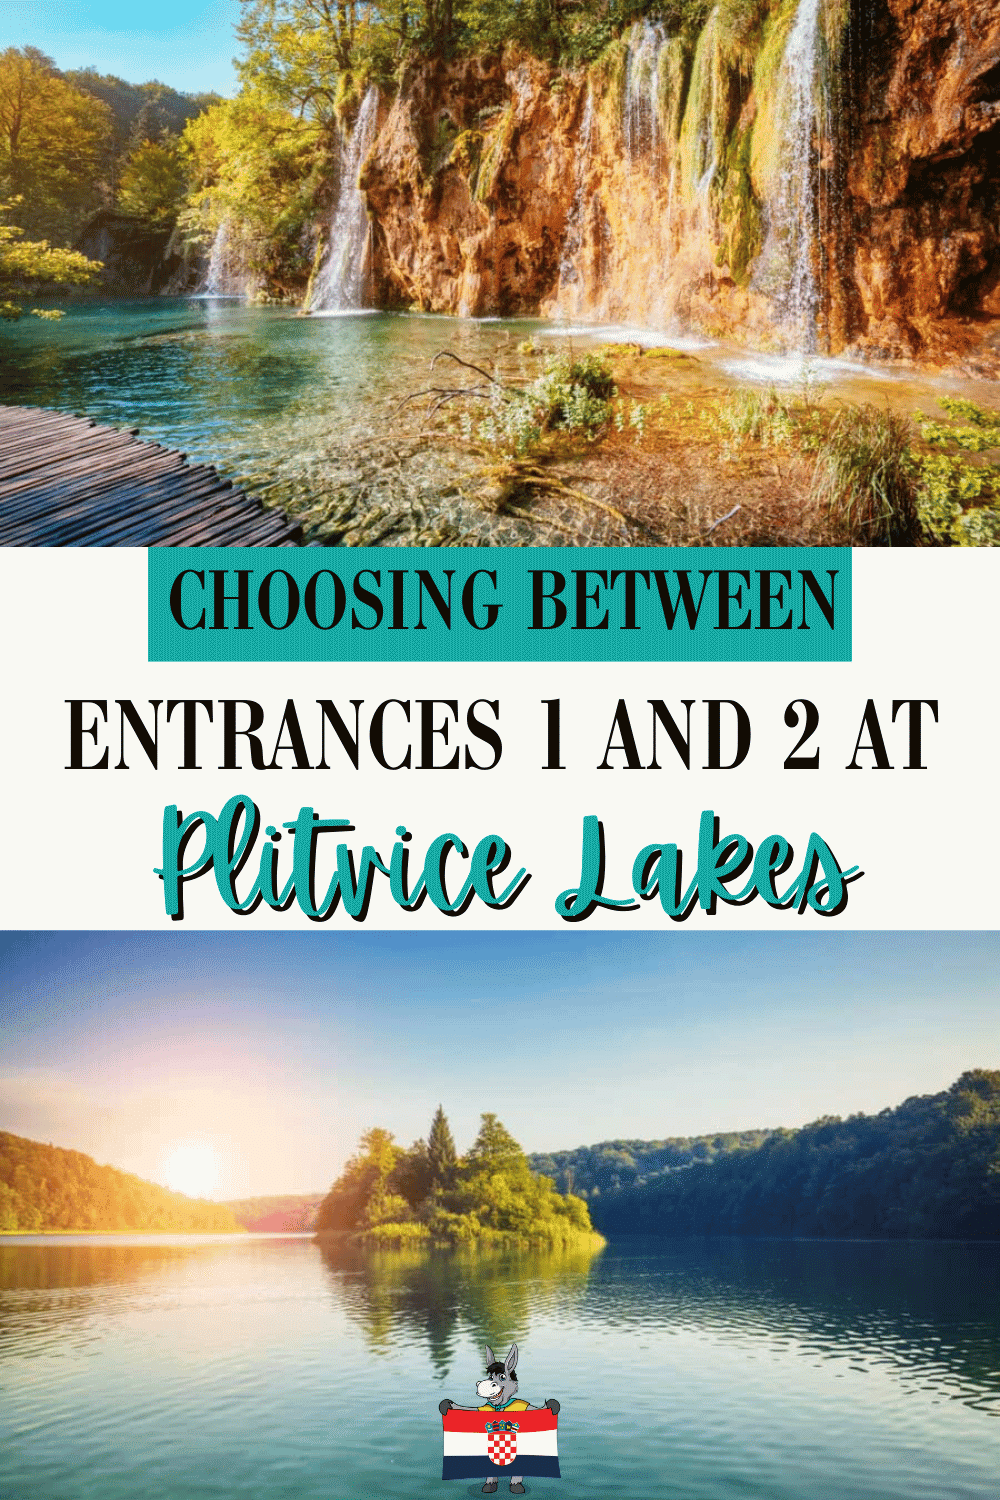 Croatia Travel Blog_How To Choose Entrance 1 Or 2 At Plitvice Lakes